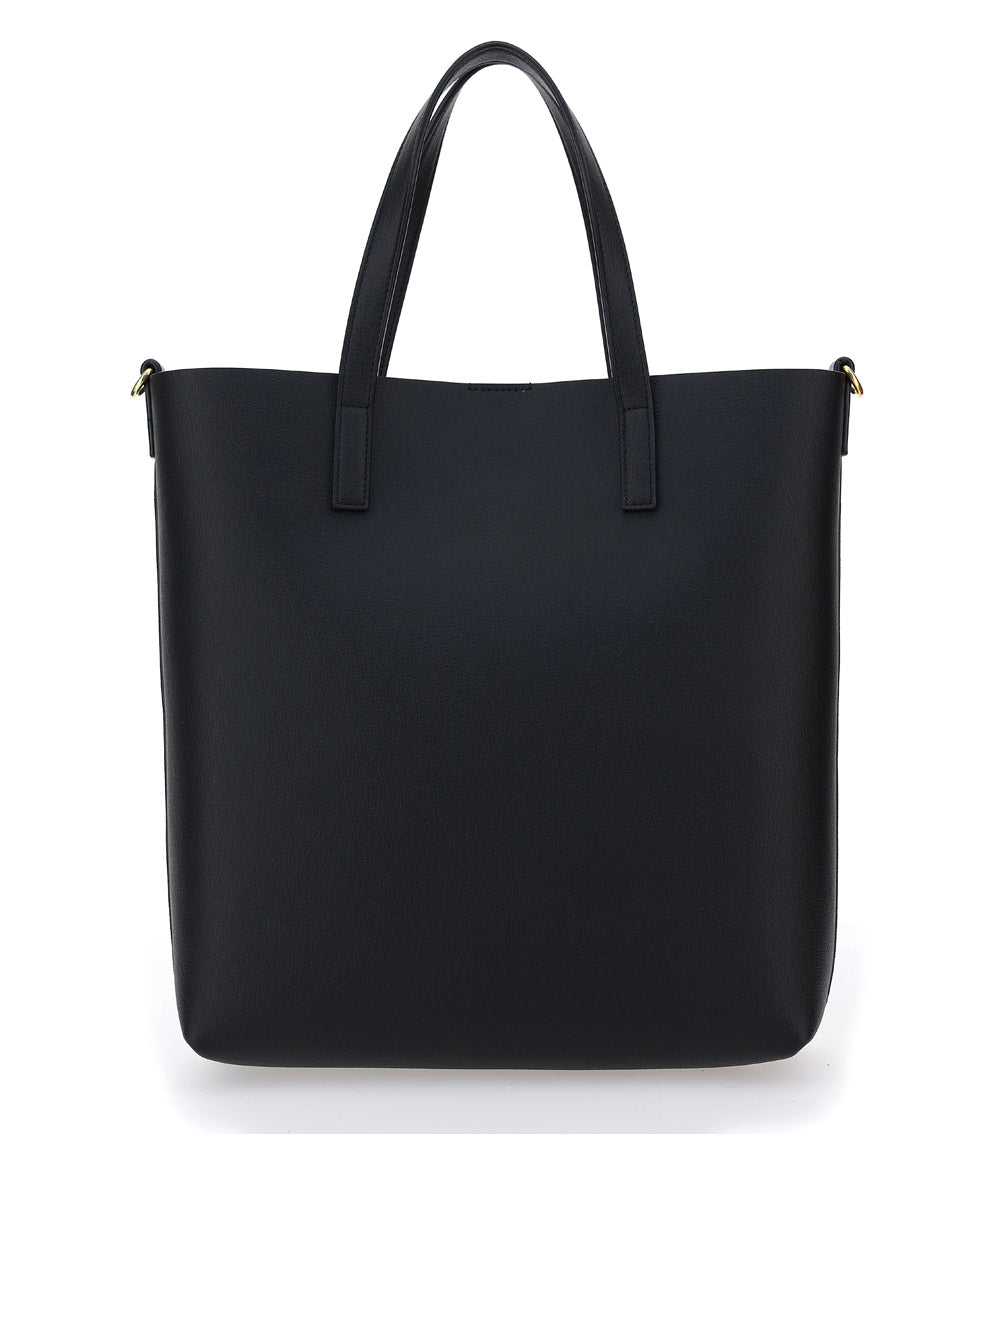 Shopping Bag Saint Laurent Toy In Supple Leather - Black